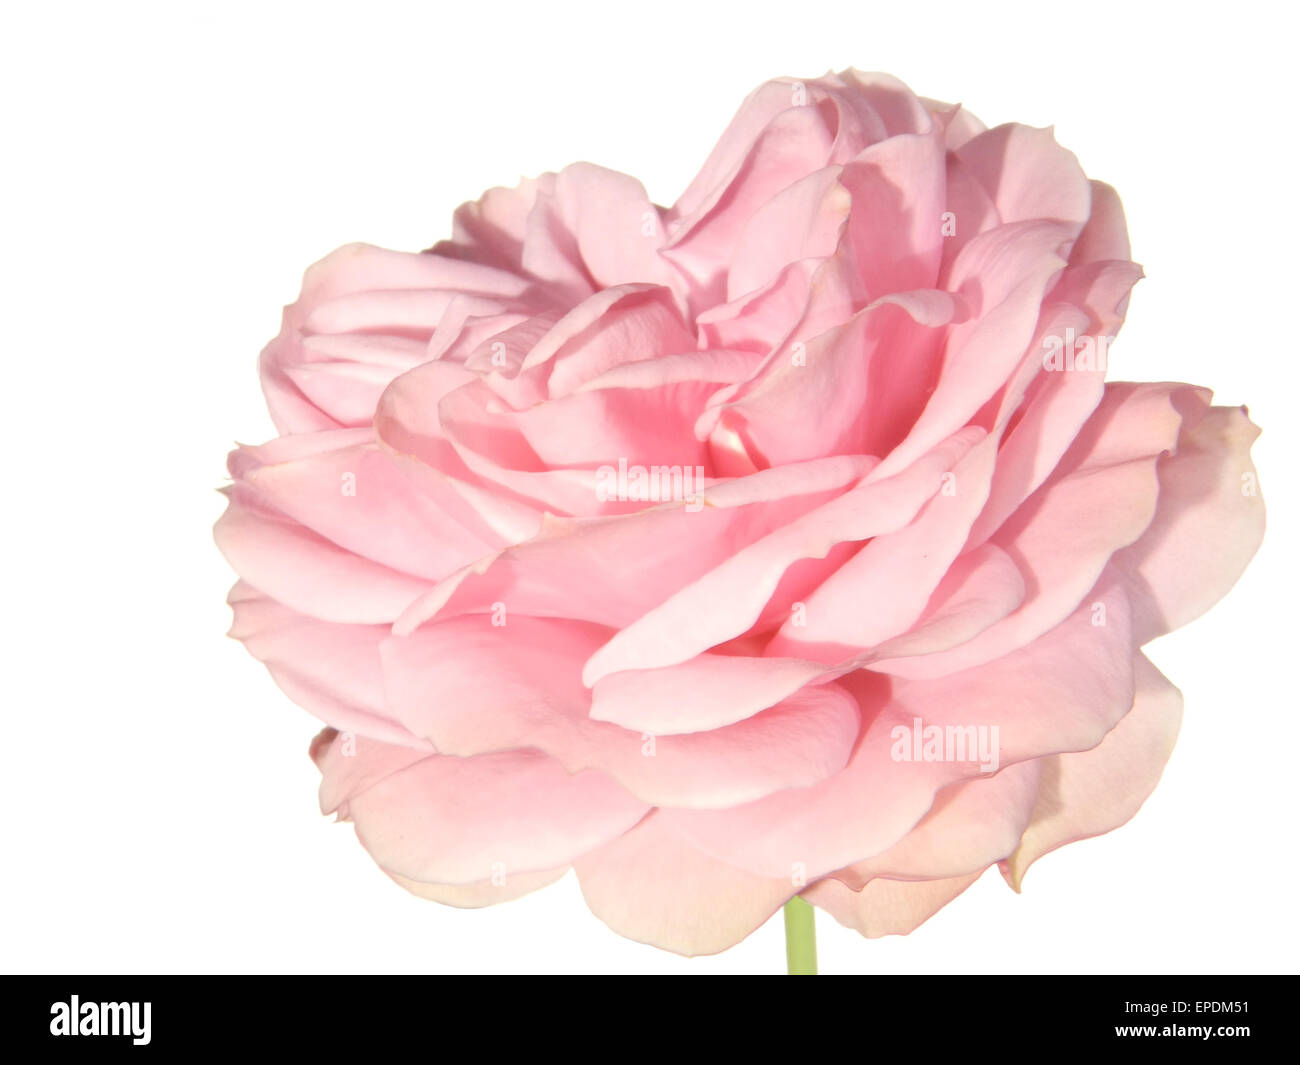 A pink rose isolated on a white background Stock Photo